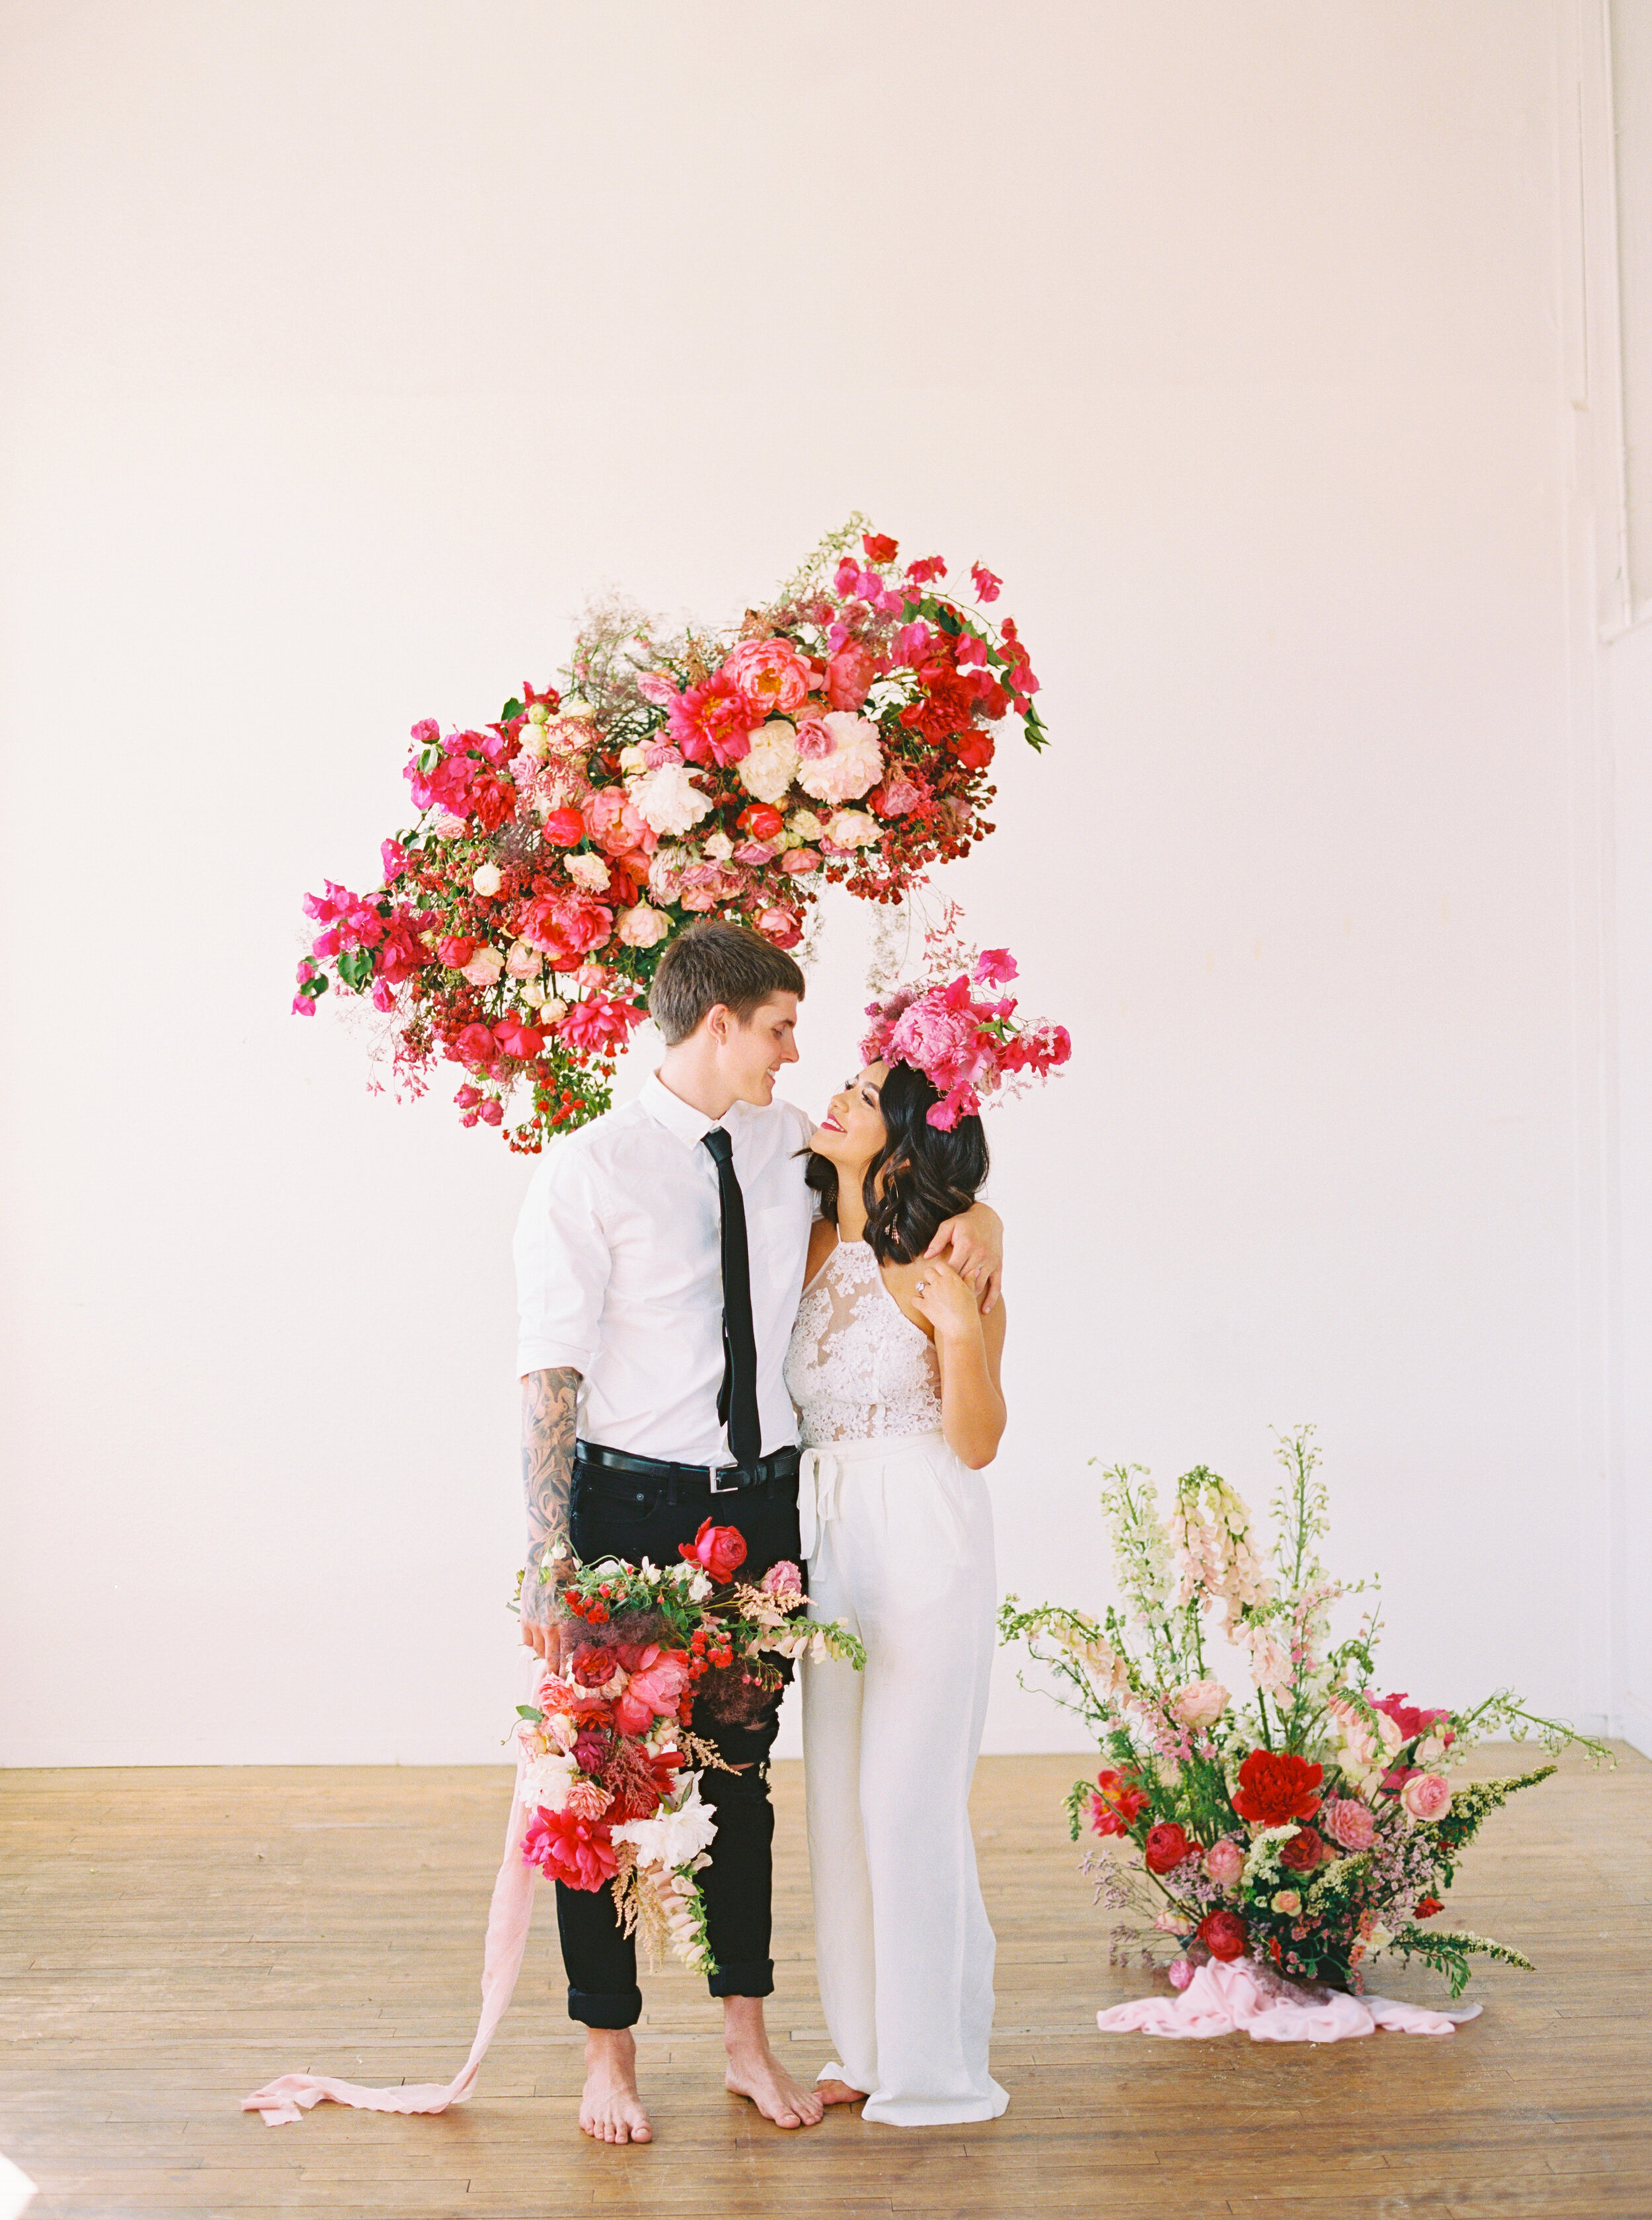 A Romantic Wedding Elopement Filled with Colorful Fuchsia - Sarahi Hadden Submission-74.jpg